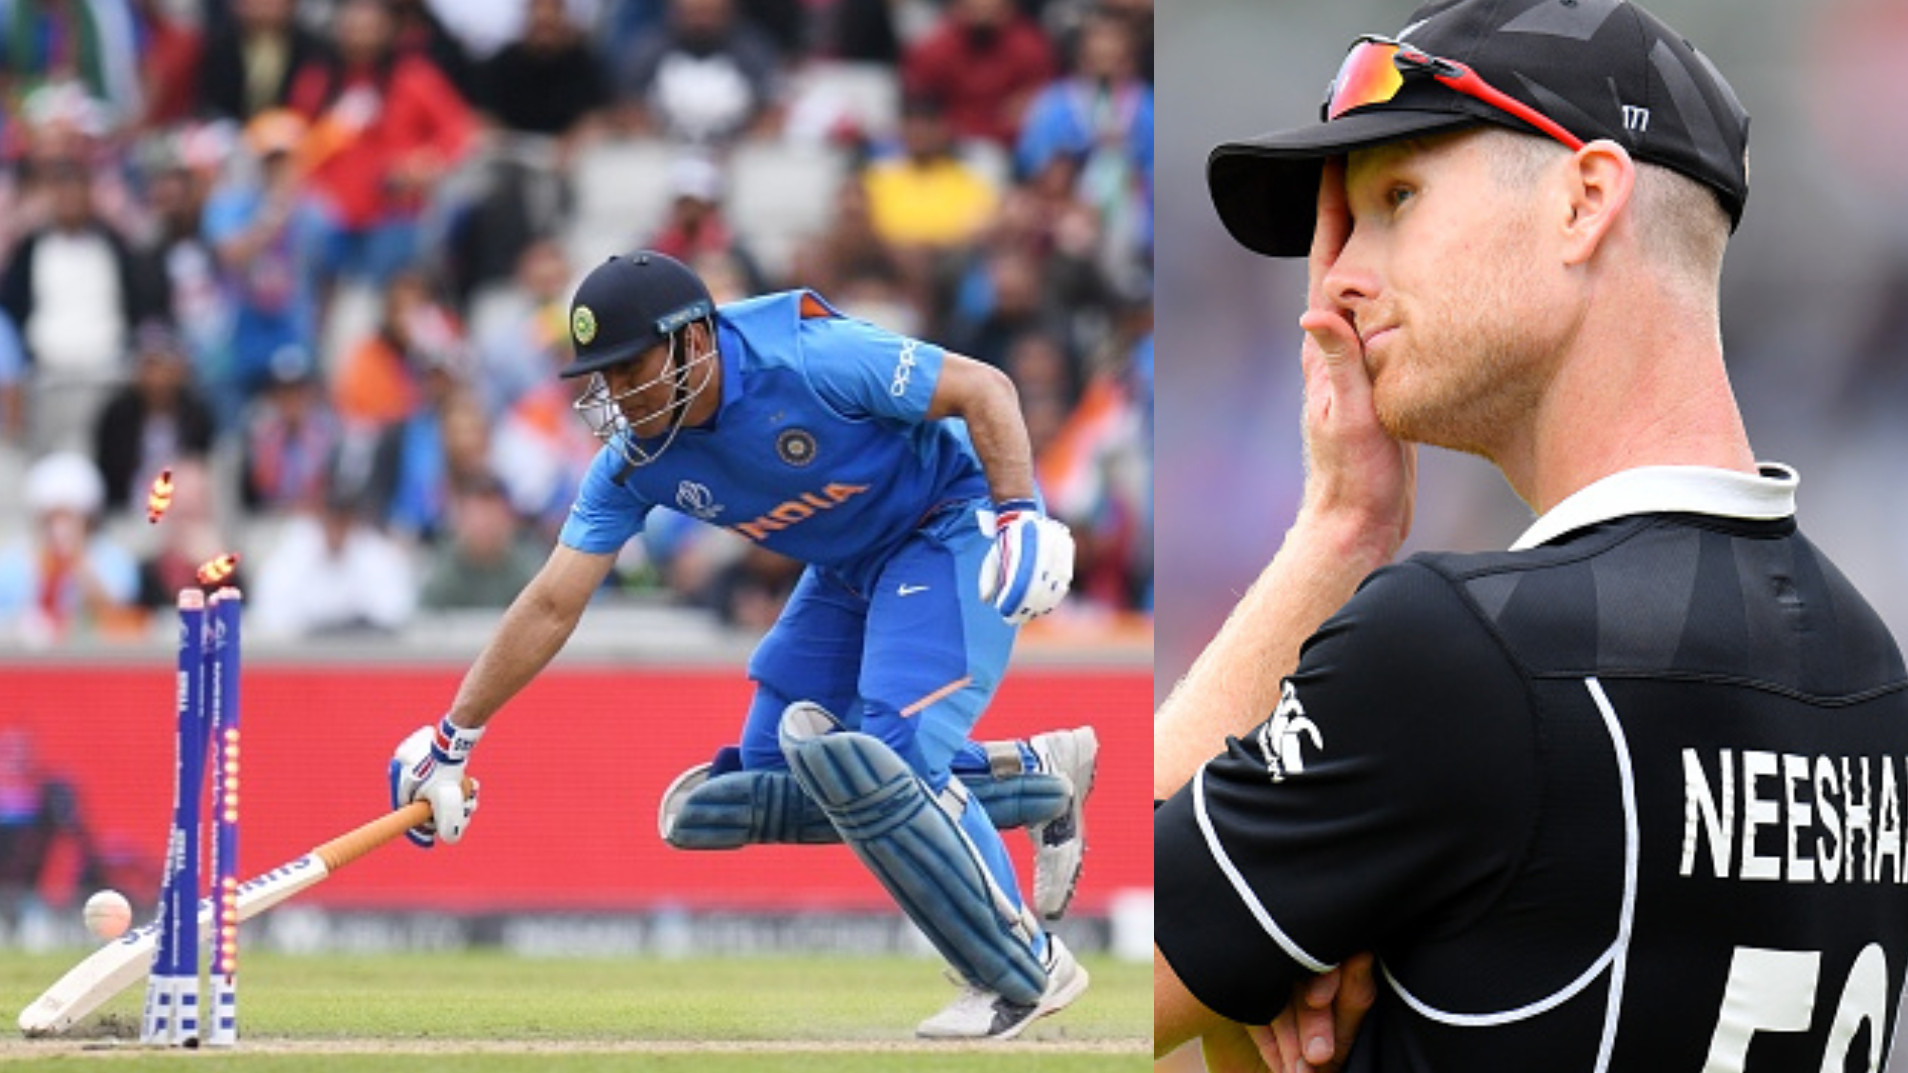 Jimmy Neesham reveals his feeling before and after MS Dhoni’s runout in 2019 WC Semi final